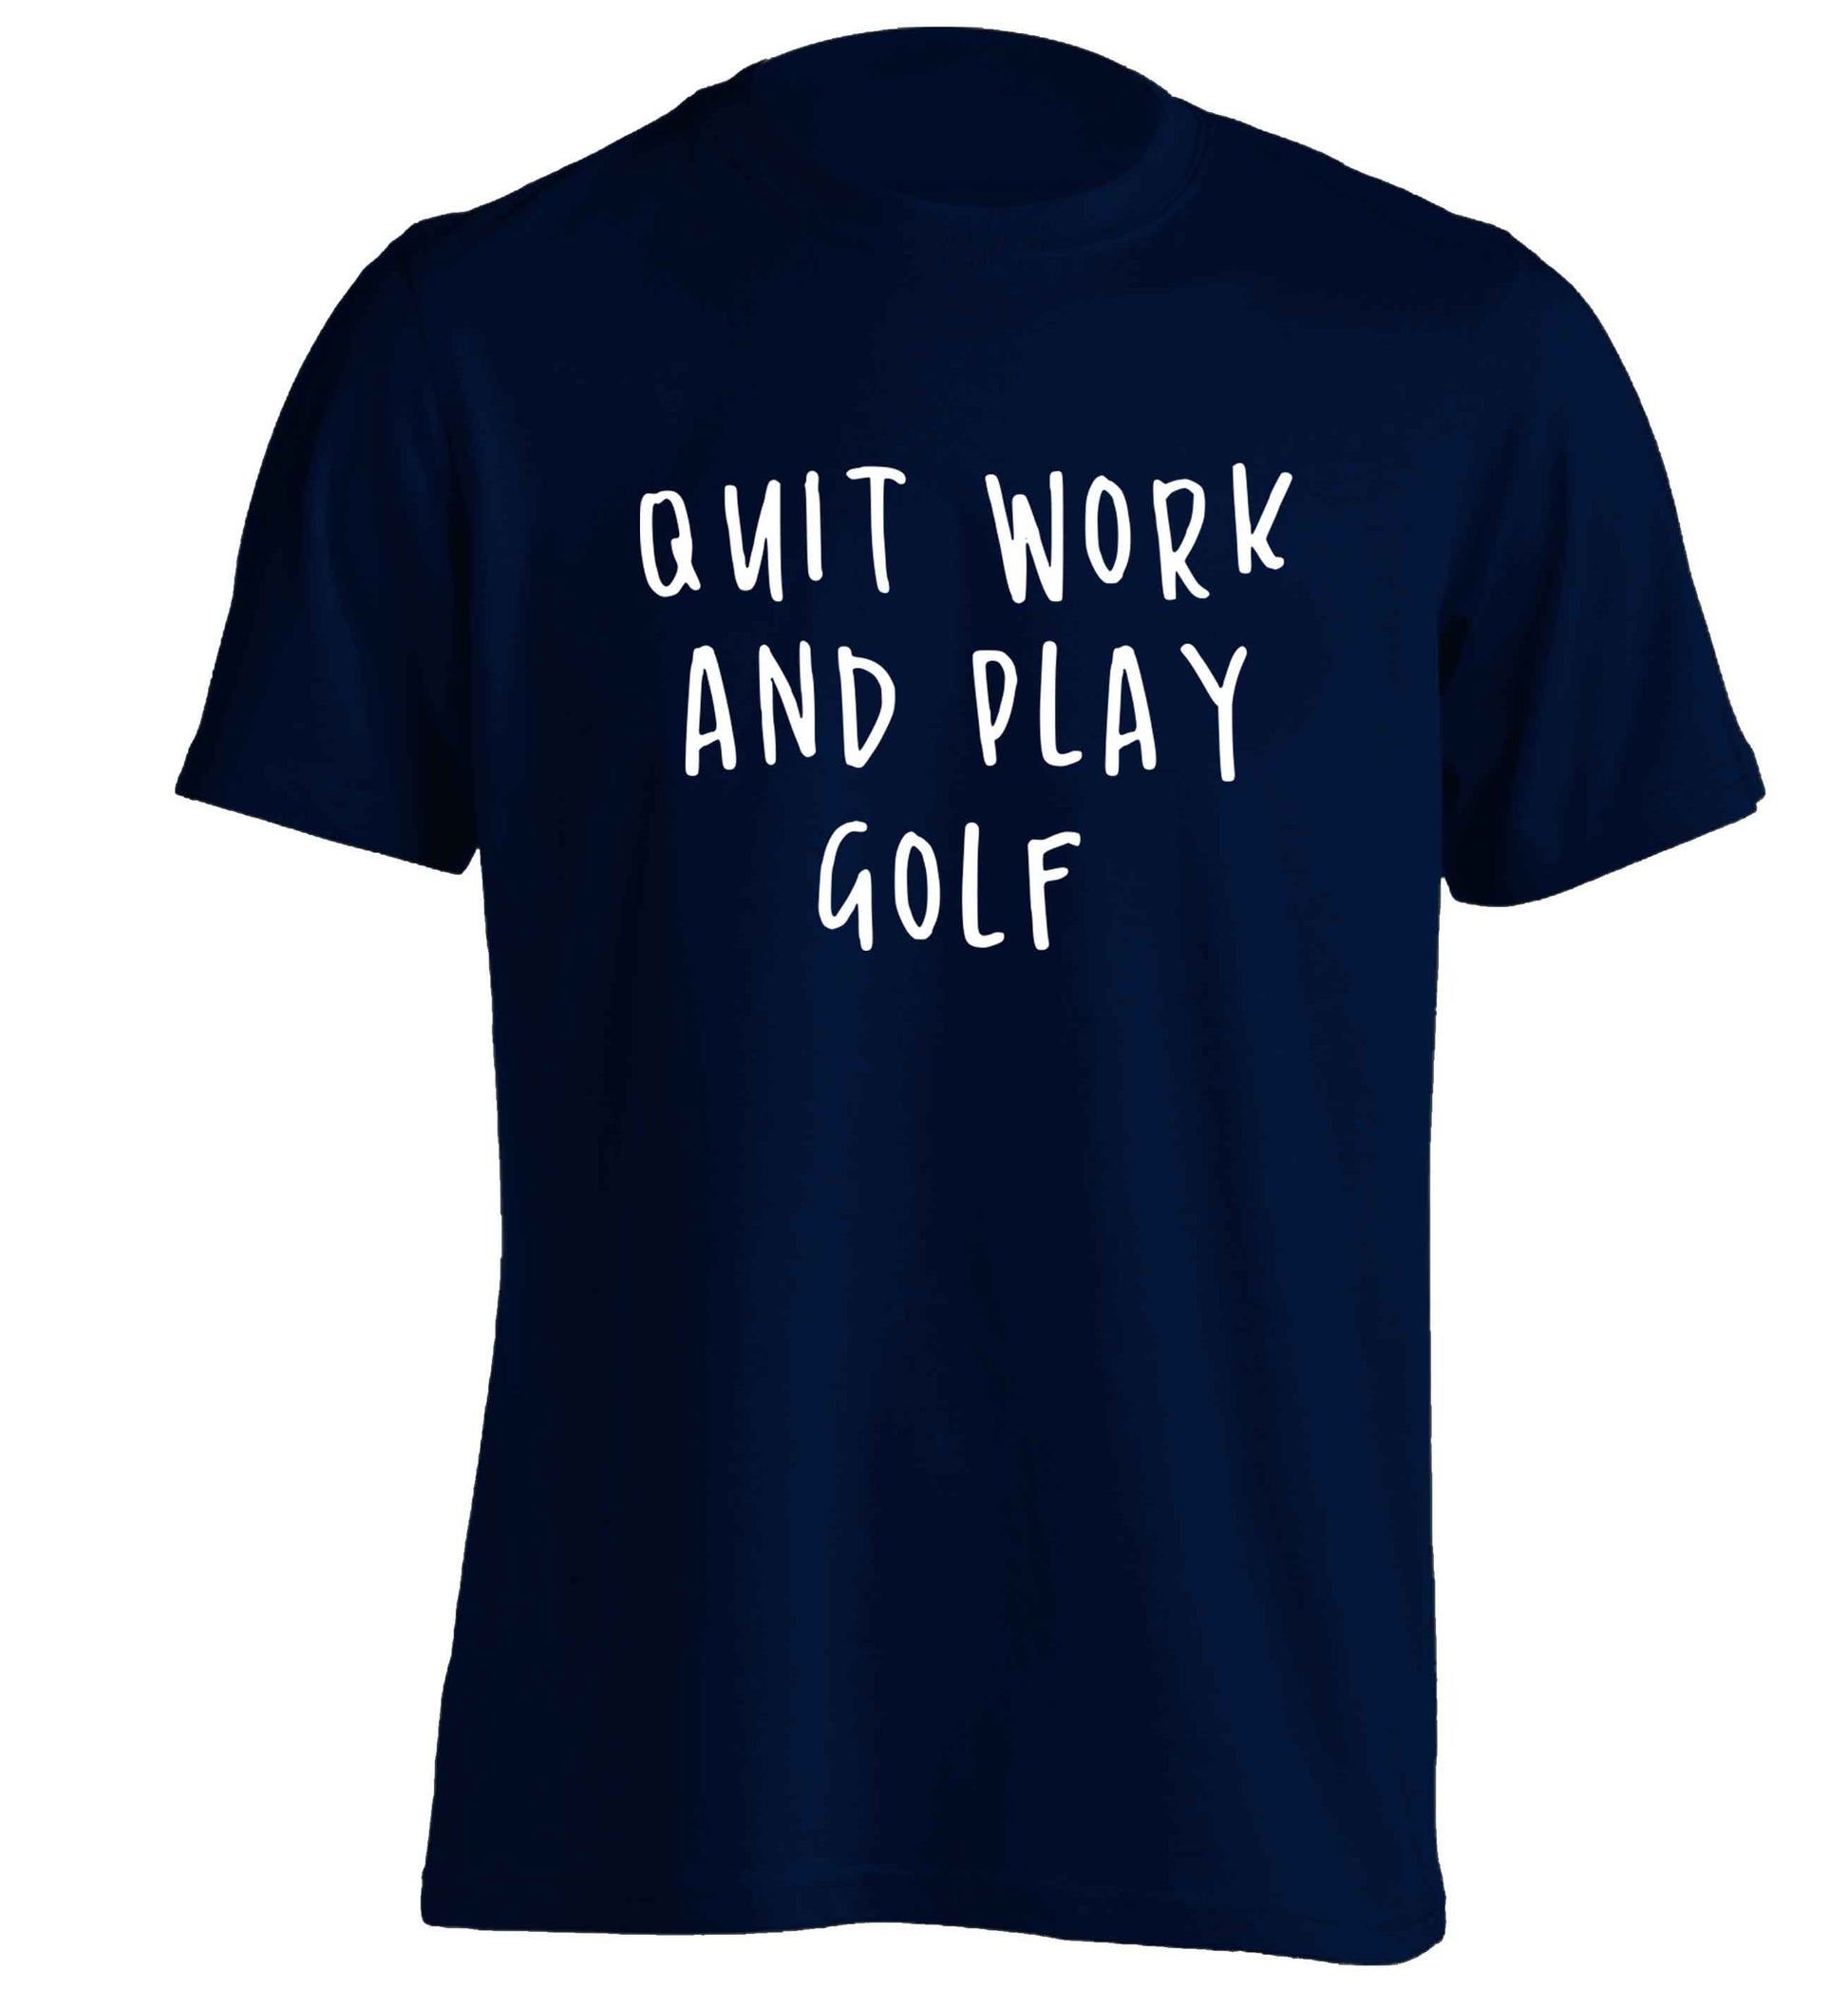 Quit work and play golf adults unisex navy Tshirt 2XL